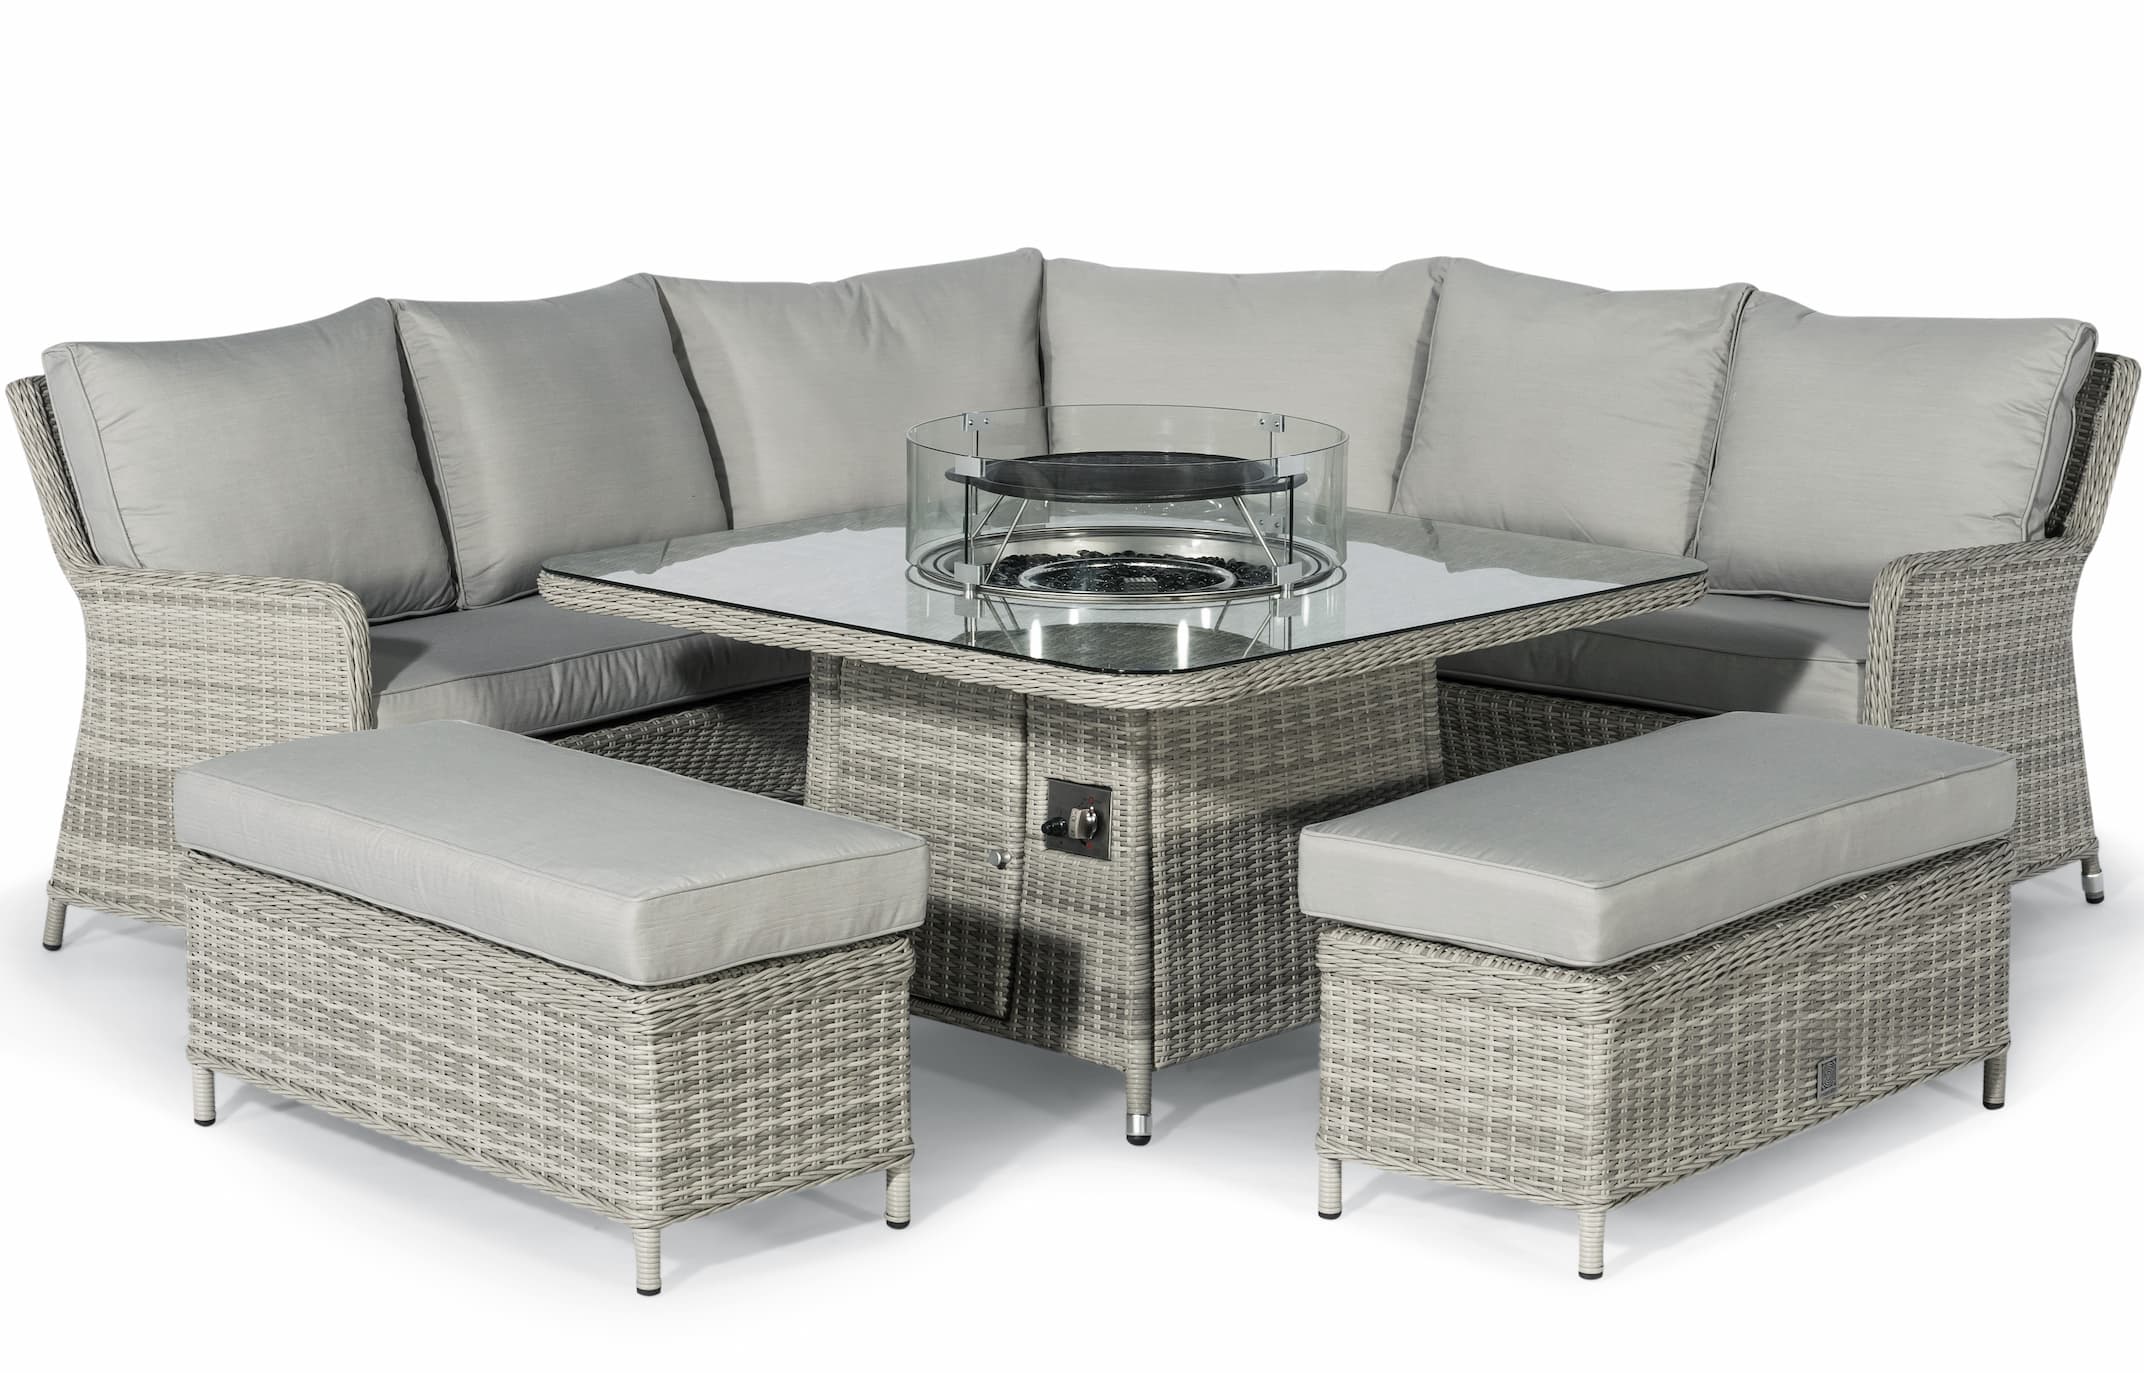 Royal Corner Garden Furniture Set With, Fire Pit With Couch